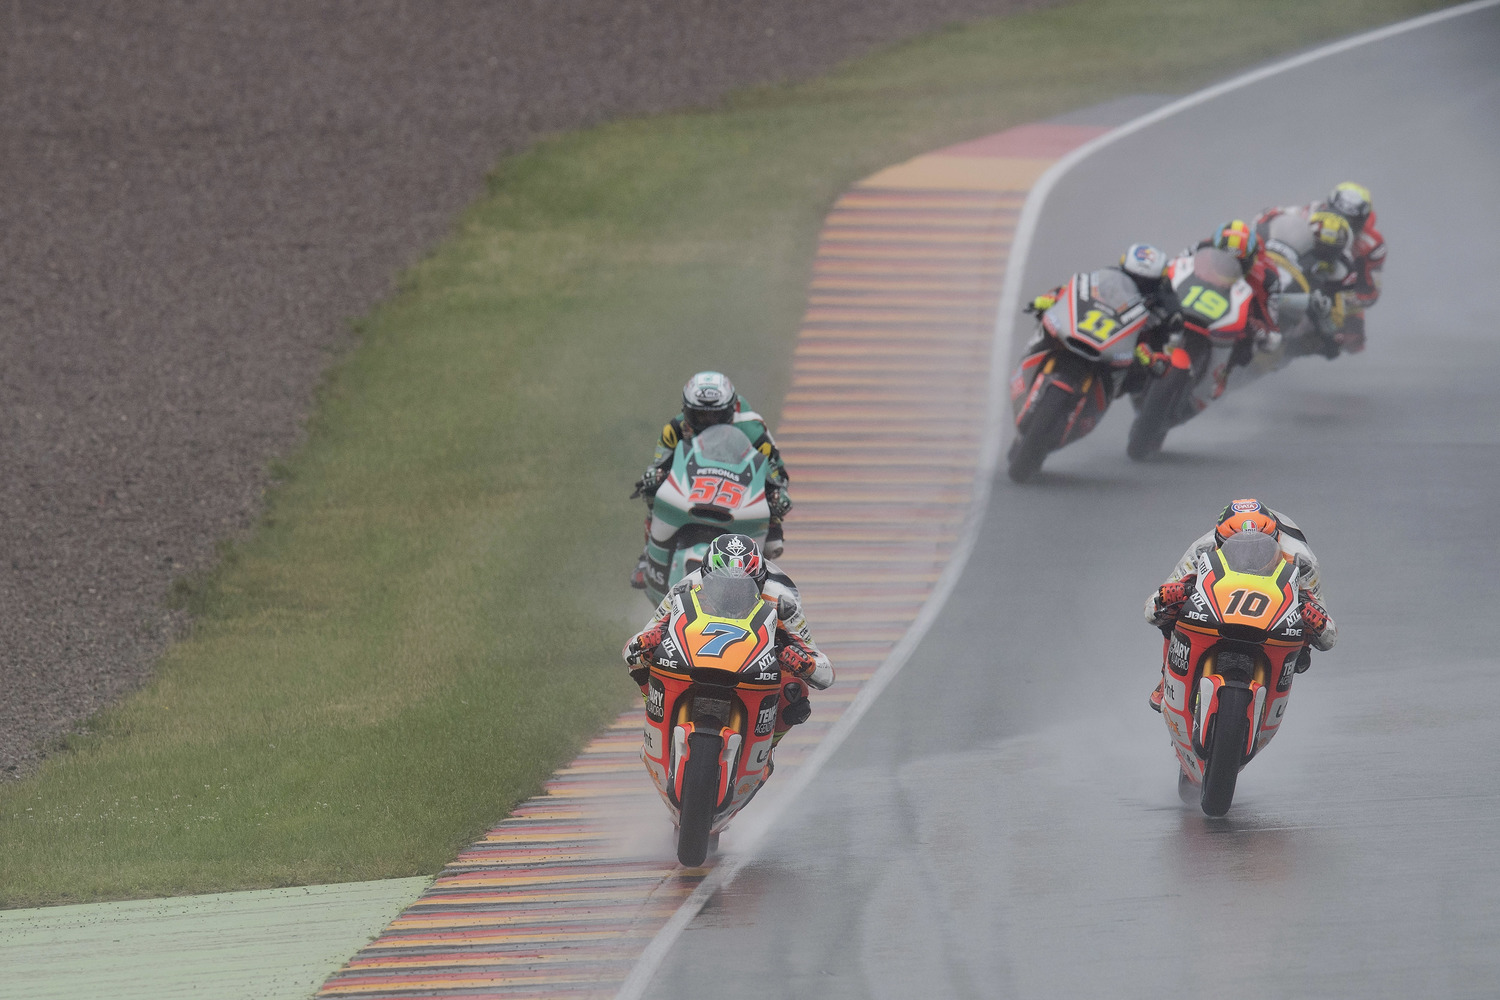 Heroic fifth and sixth place for Baldassarri and Marini at Sachsenring